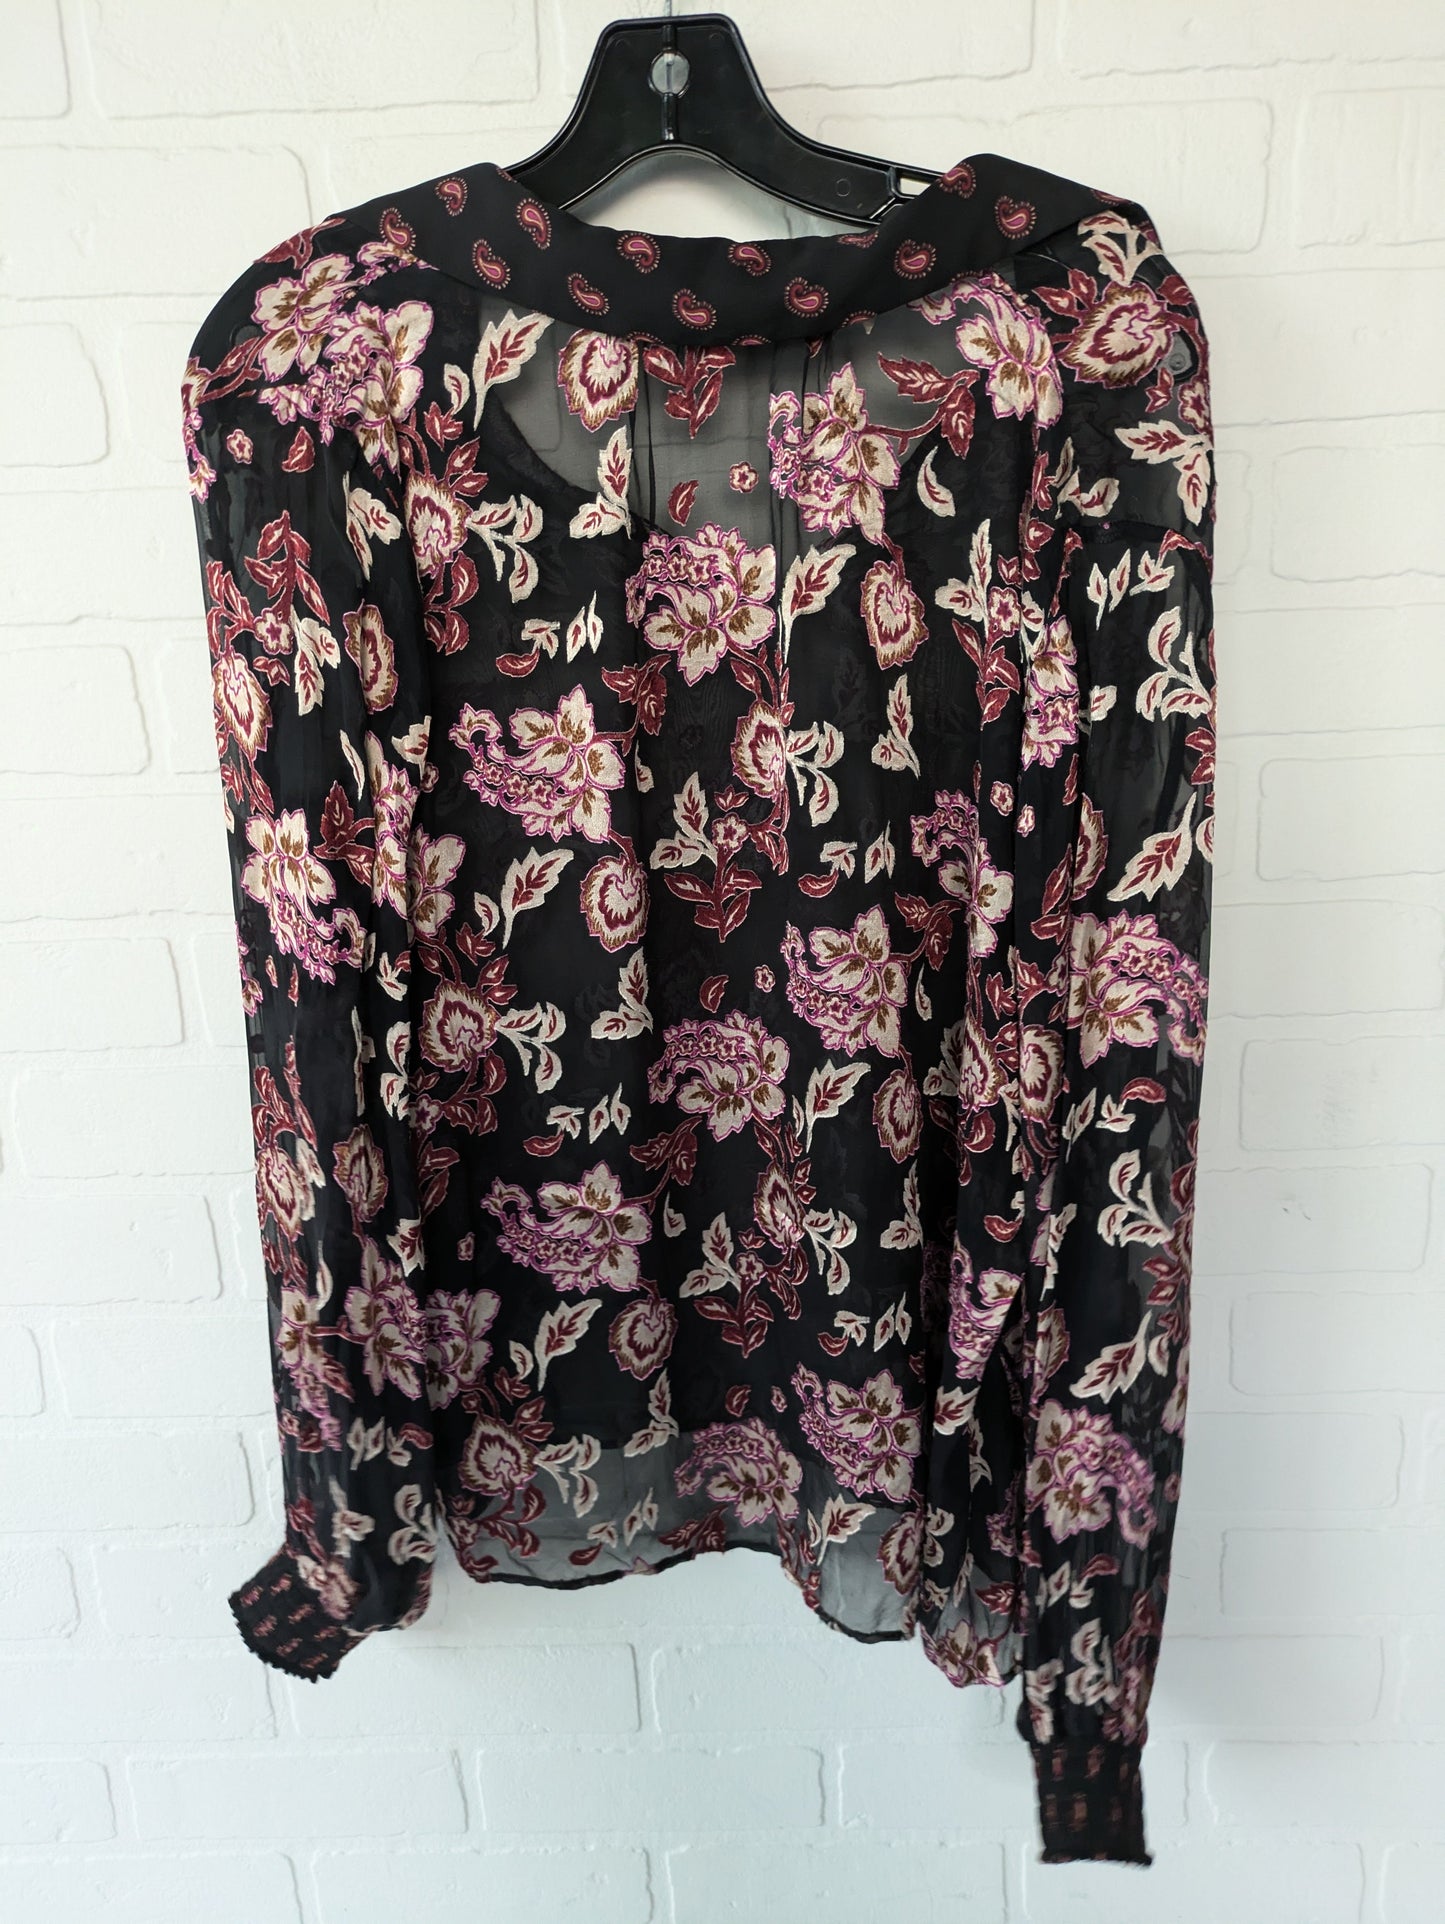 Floral Print Top Long Sleeve White House Black Market, Size S